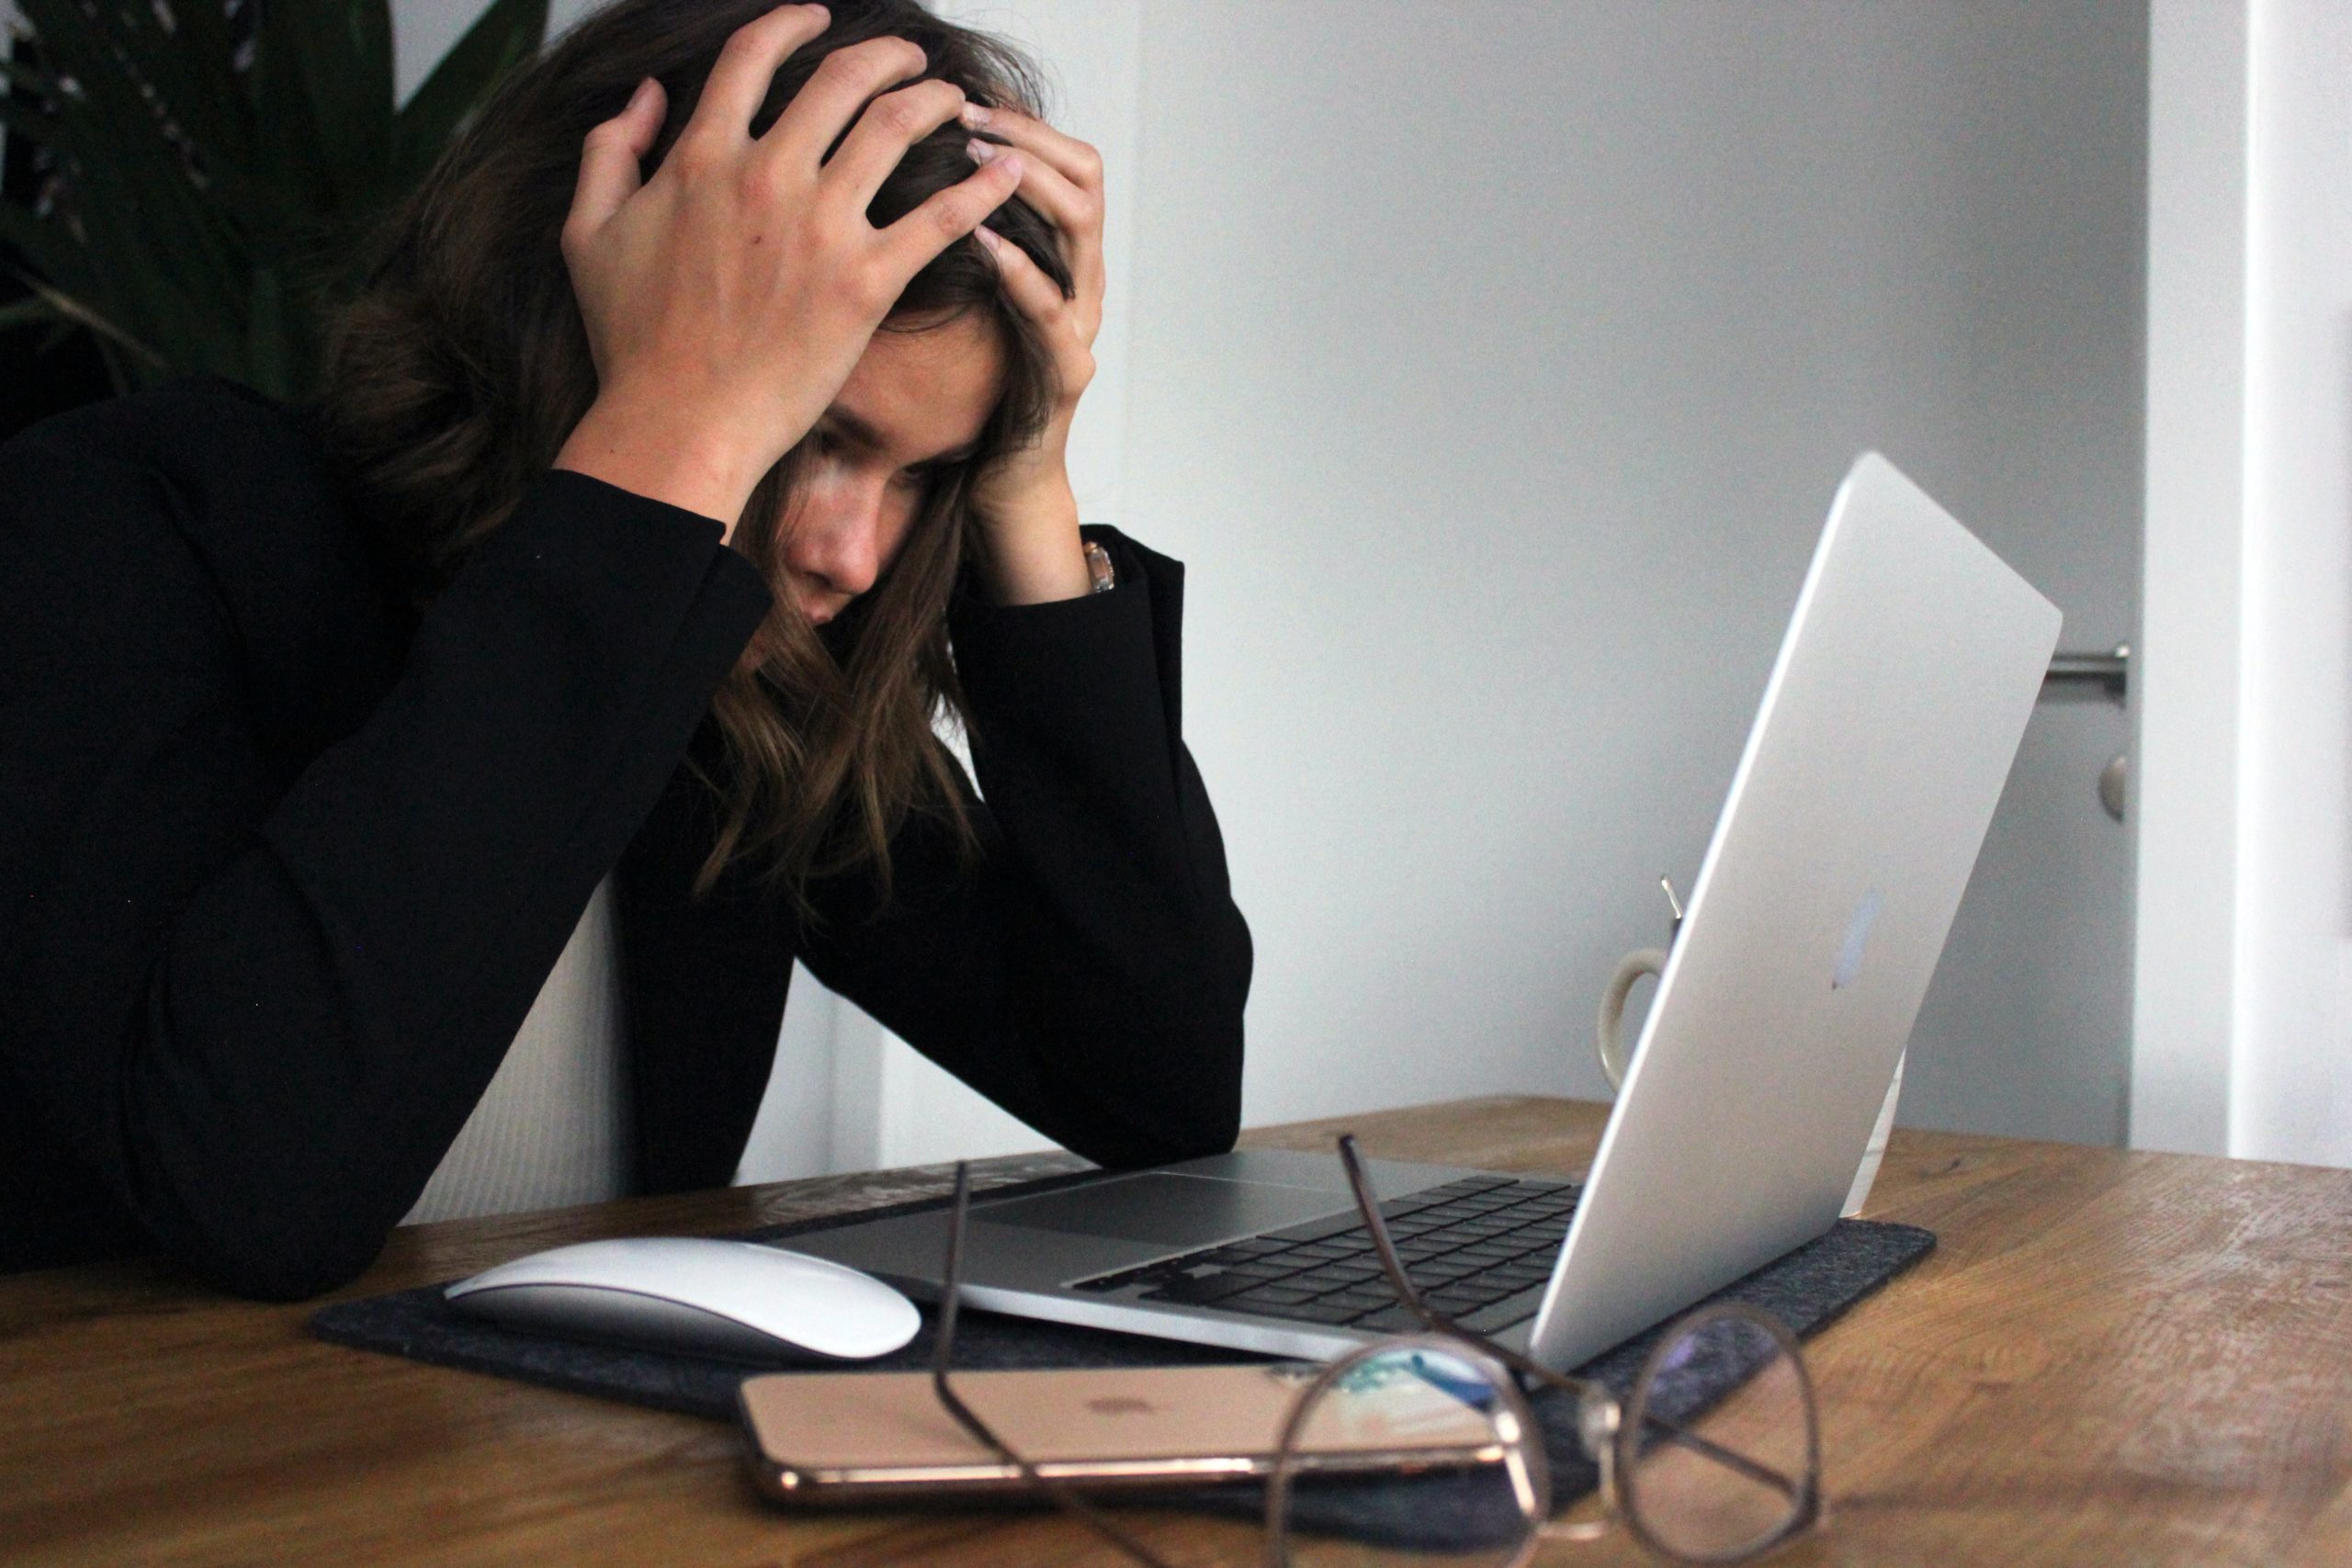 Woman looking at her laptop with hands on her head in frustration